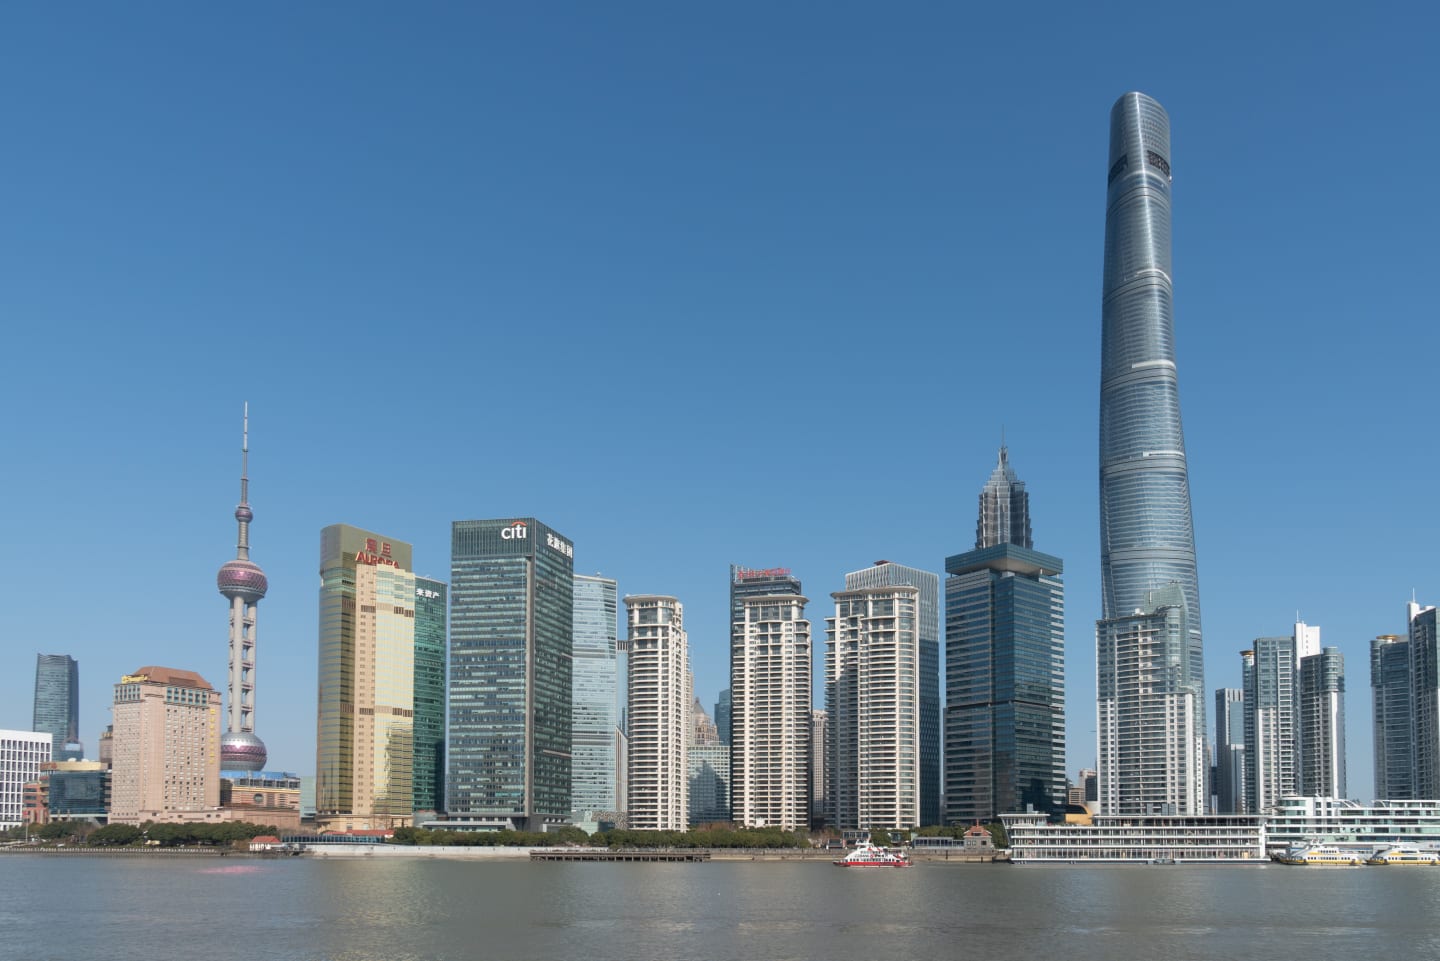 SHANGHAI, CHINA - JANUARY 17 2024: A view of the 632-meter-tall Shanghai Tower, China's tallest